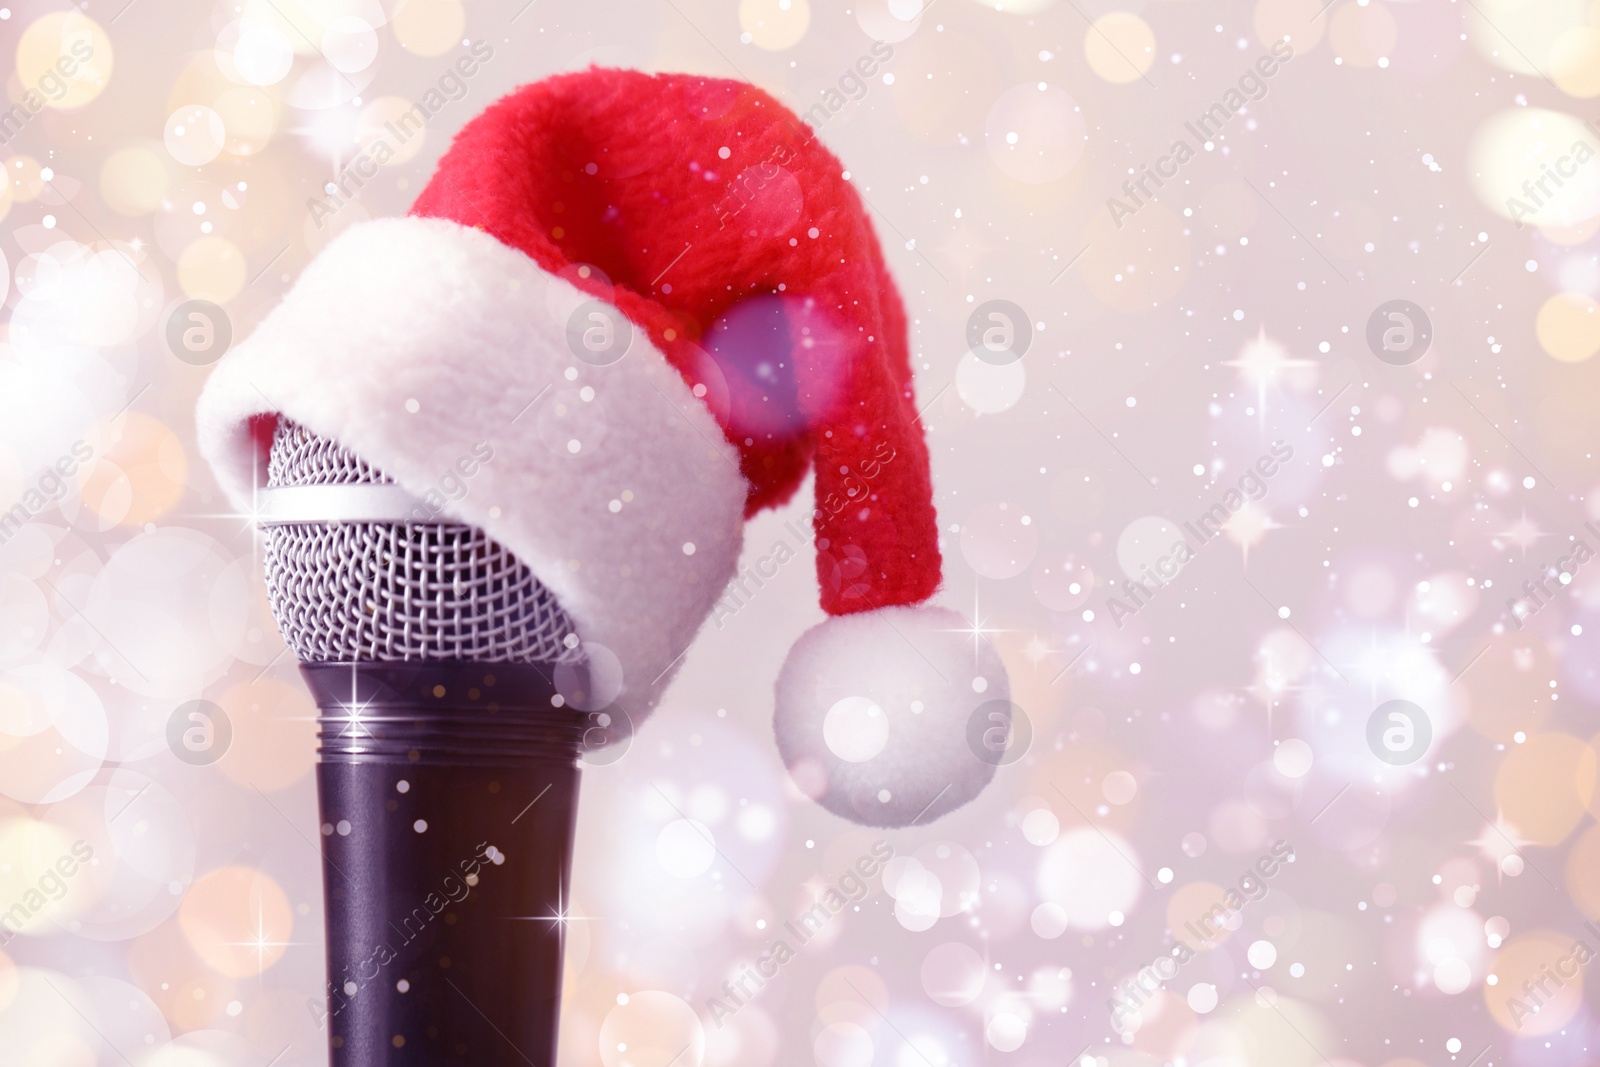 Image of Microphone with Santa hat against blurred lights, space for text. Christmas music